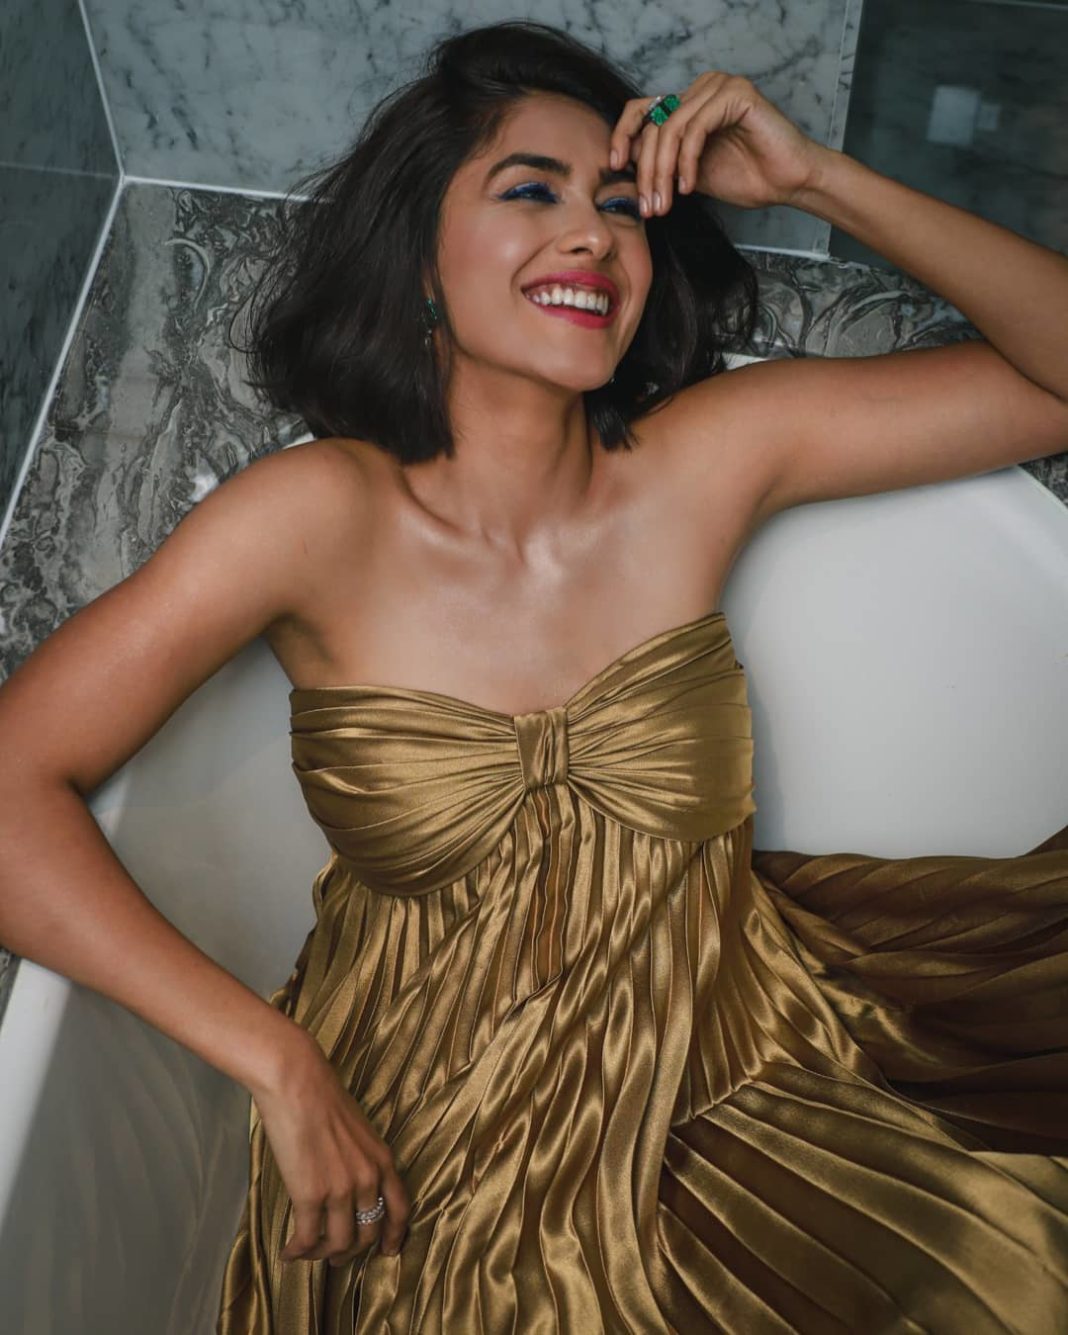 Mrunal Thakur Looks Gold In Her Latest Outfit For The Gold Awards The